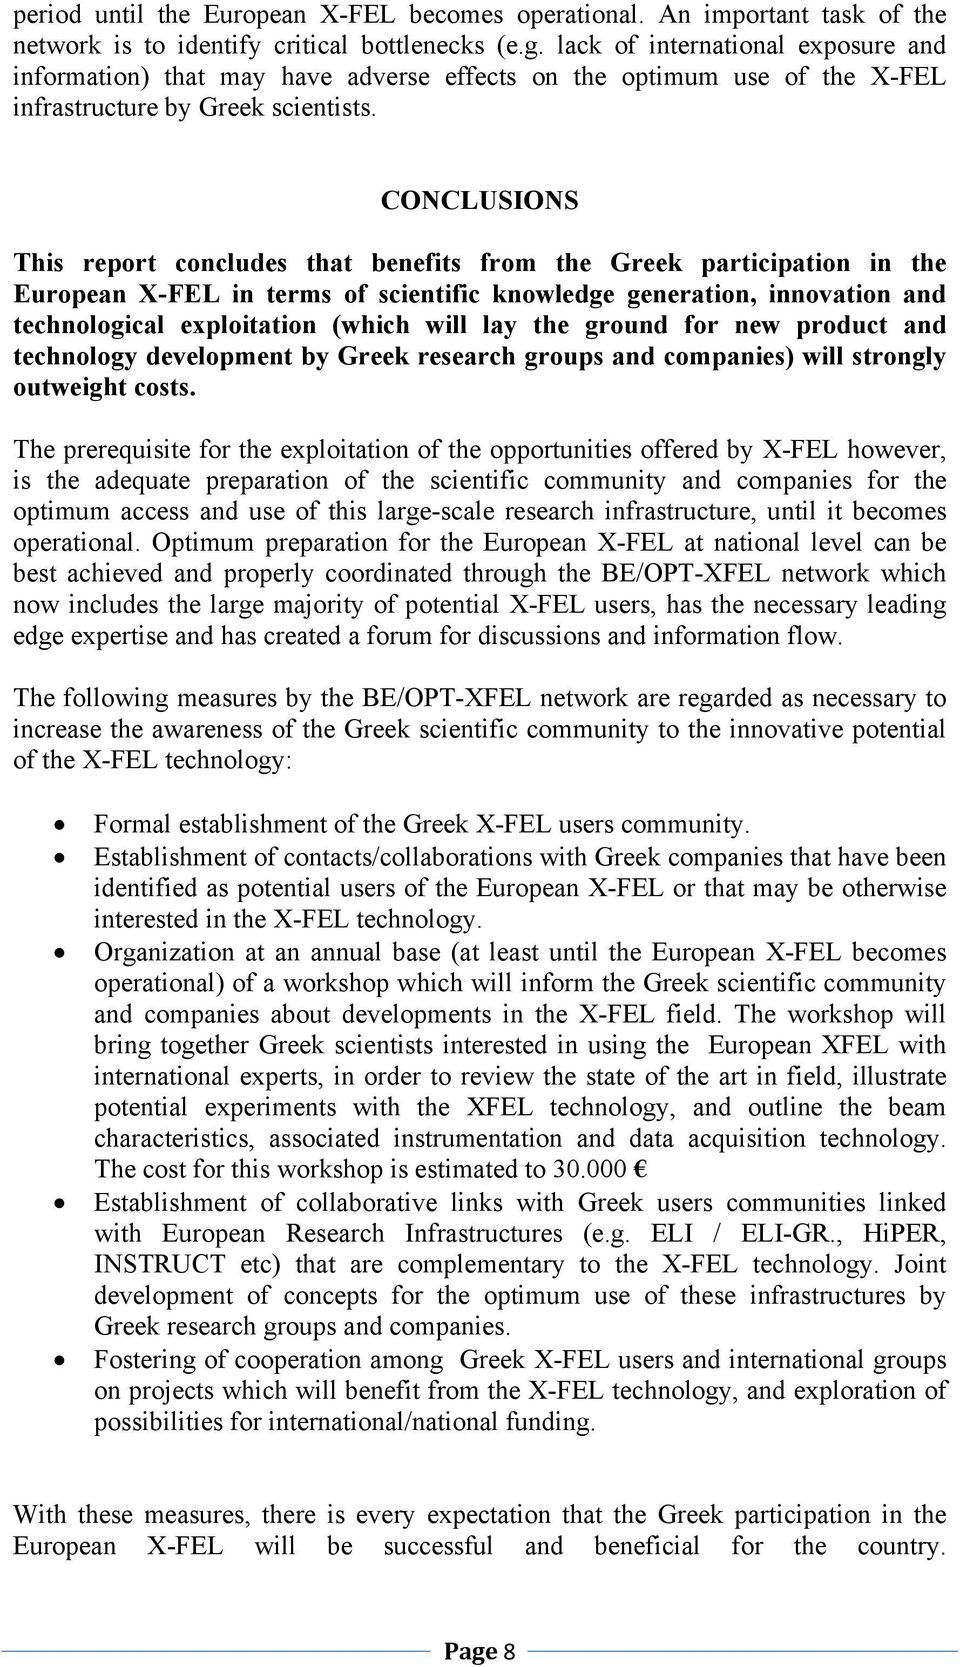 CONCLUSIONS This report concludes that benefits from the Greek participation in the European X-FEL in terms of scientific knowledge generation, innovation and technological exploitation (which will